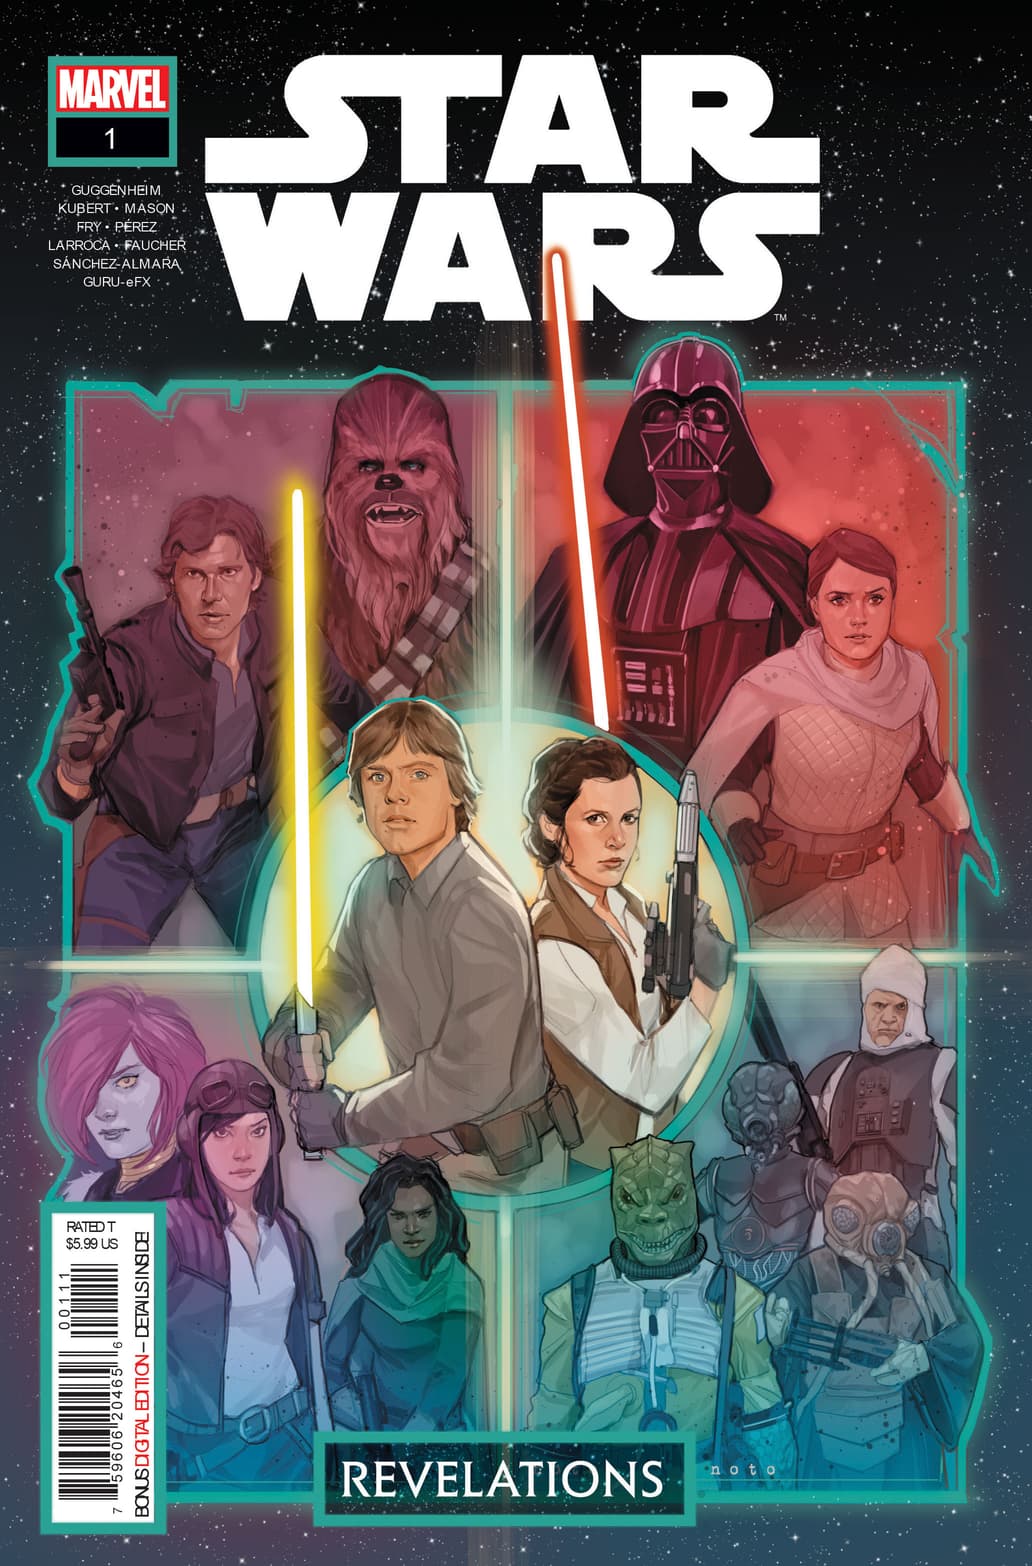 STAR WARS: REVELATIONS #1 cover by Phil Noto